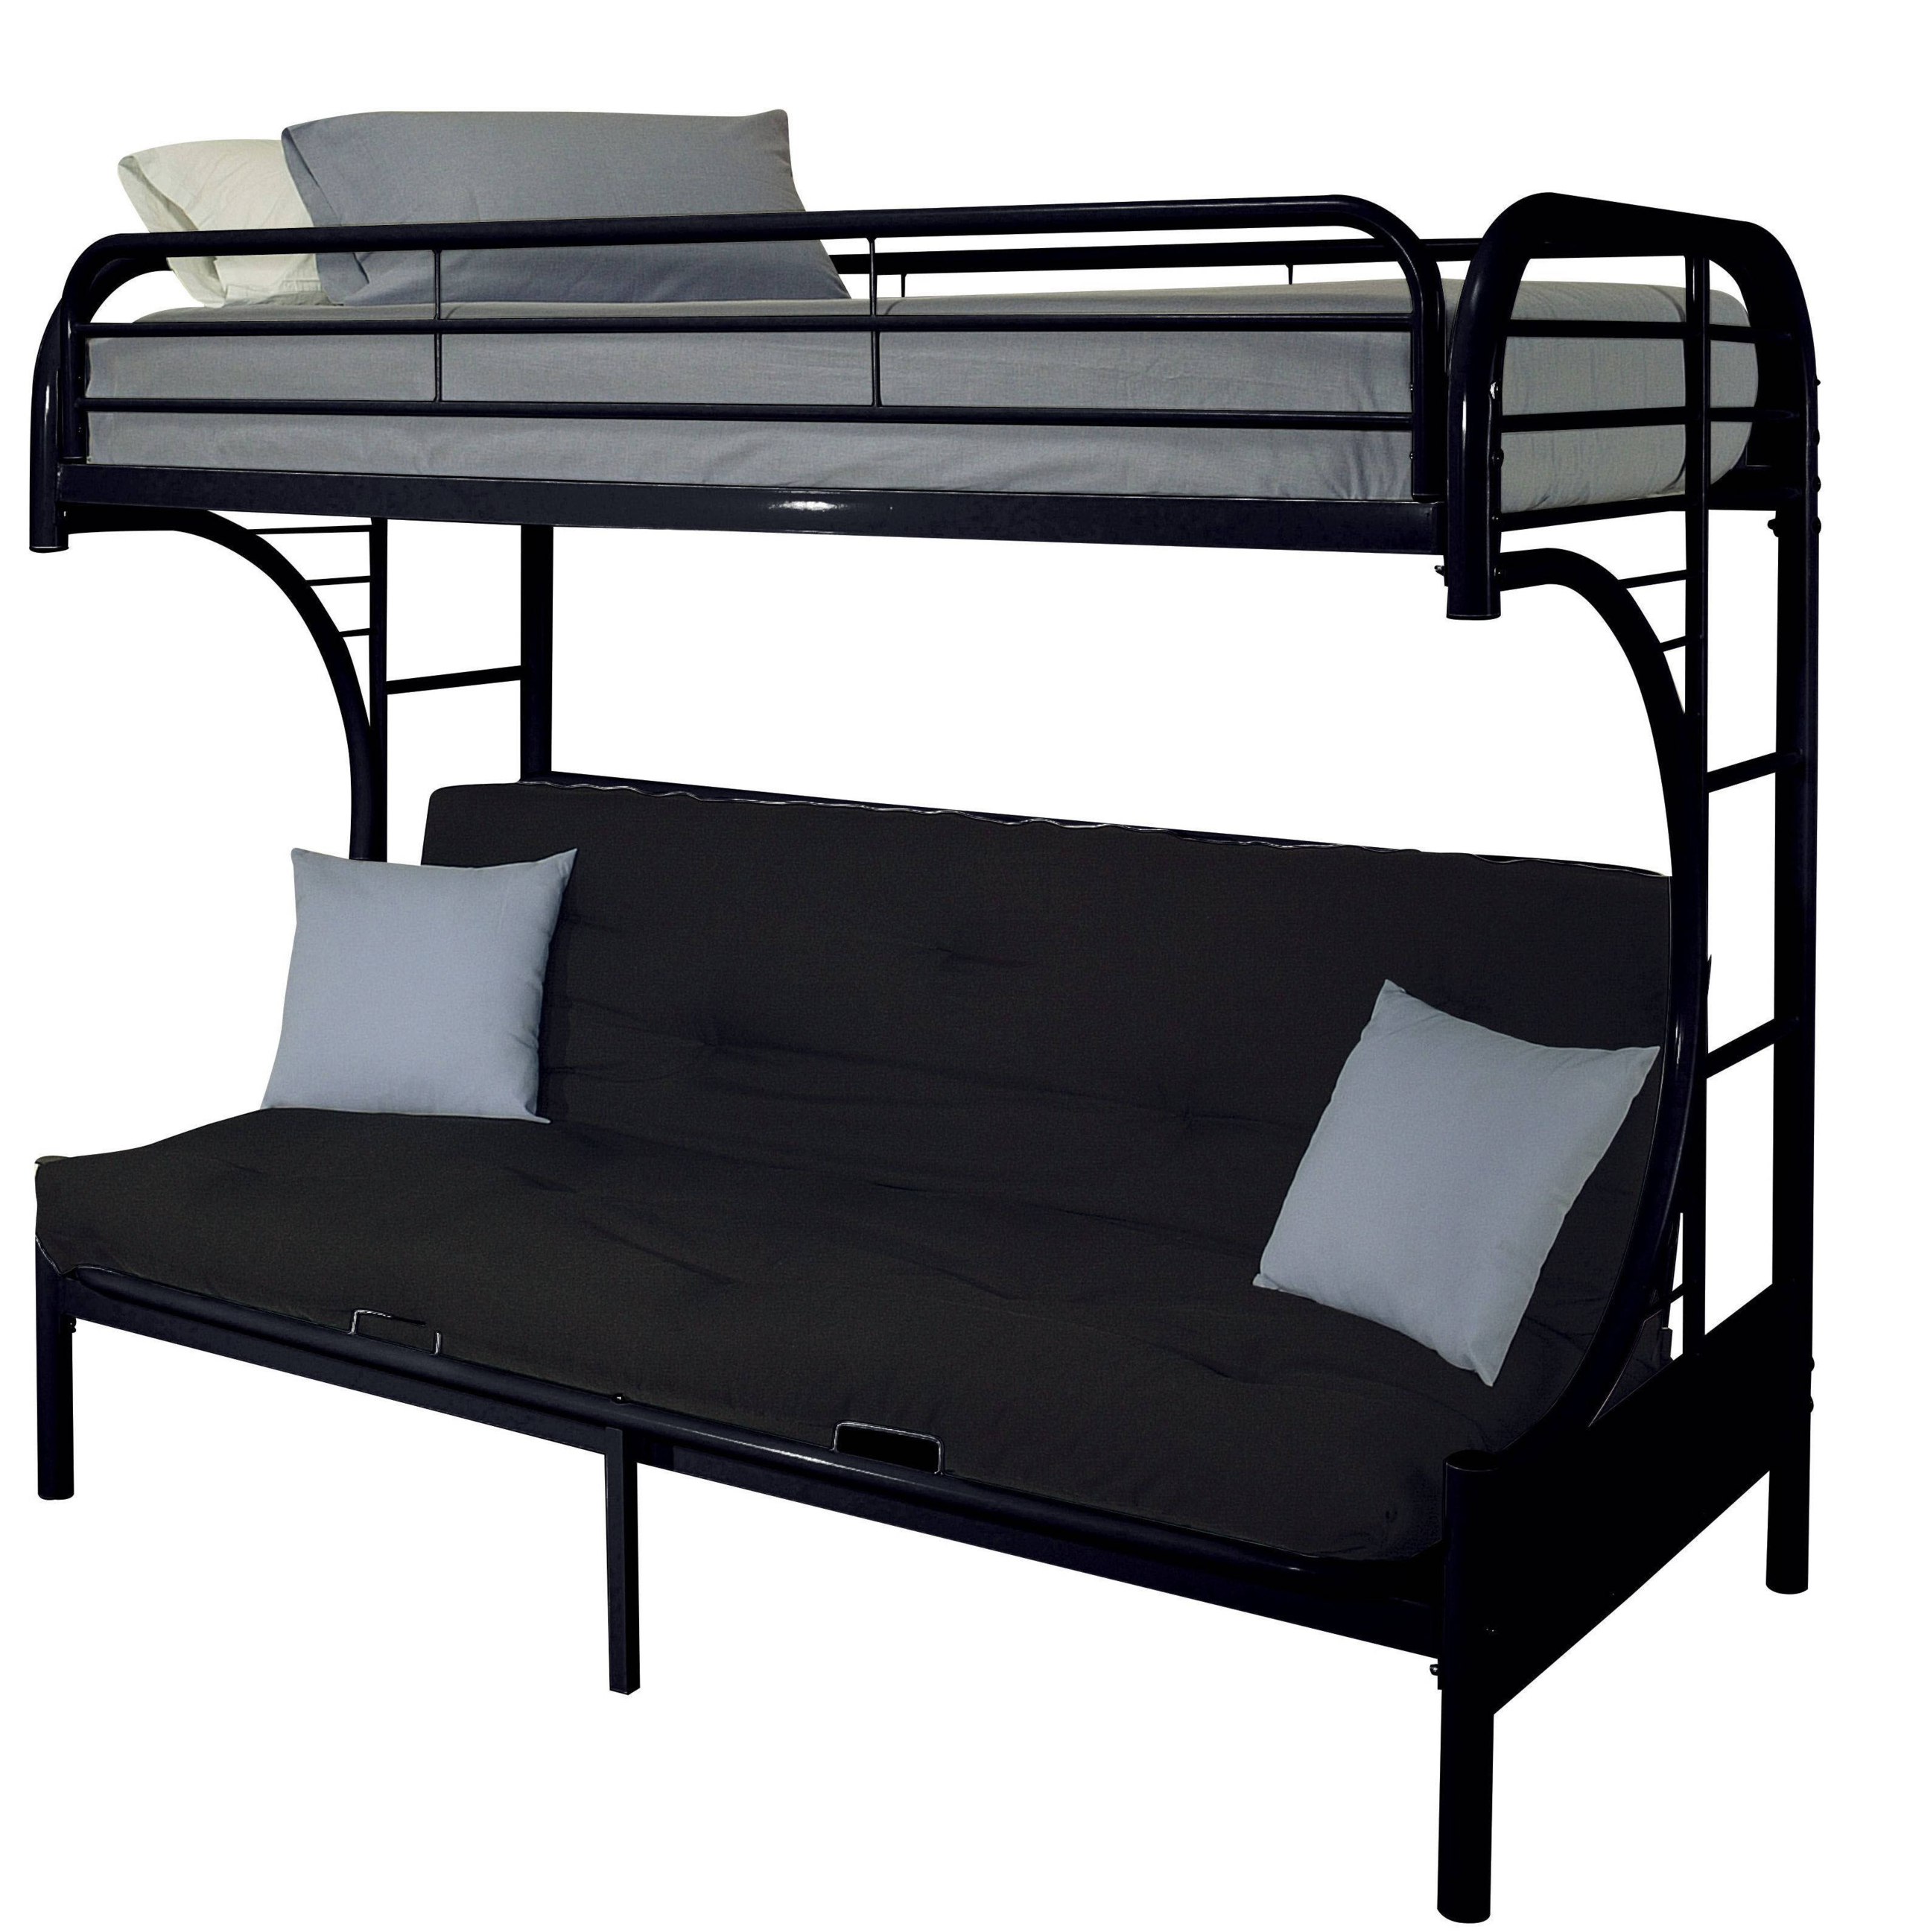 Full Over Futon Bunk Bed Visualhunt, Futon That Turns Into A Bunk Bed